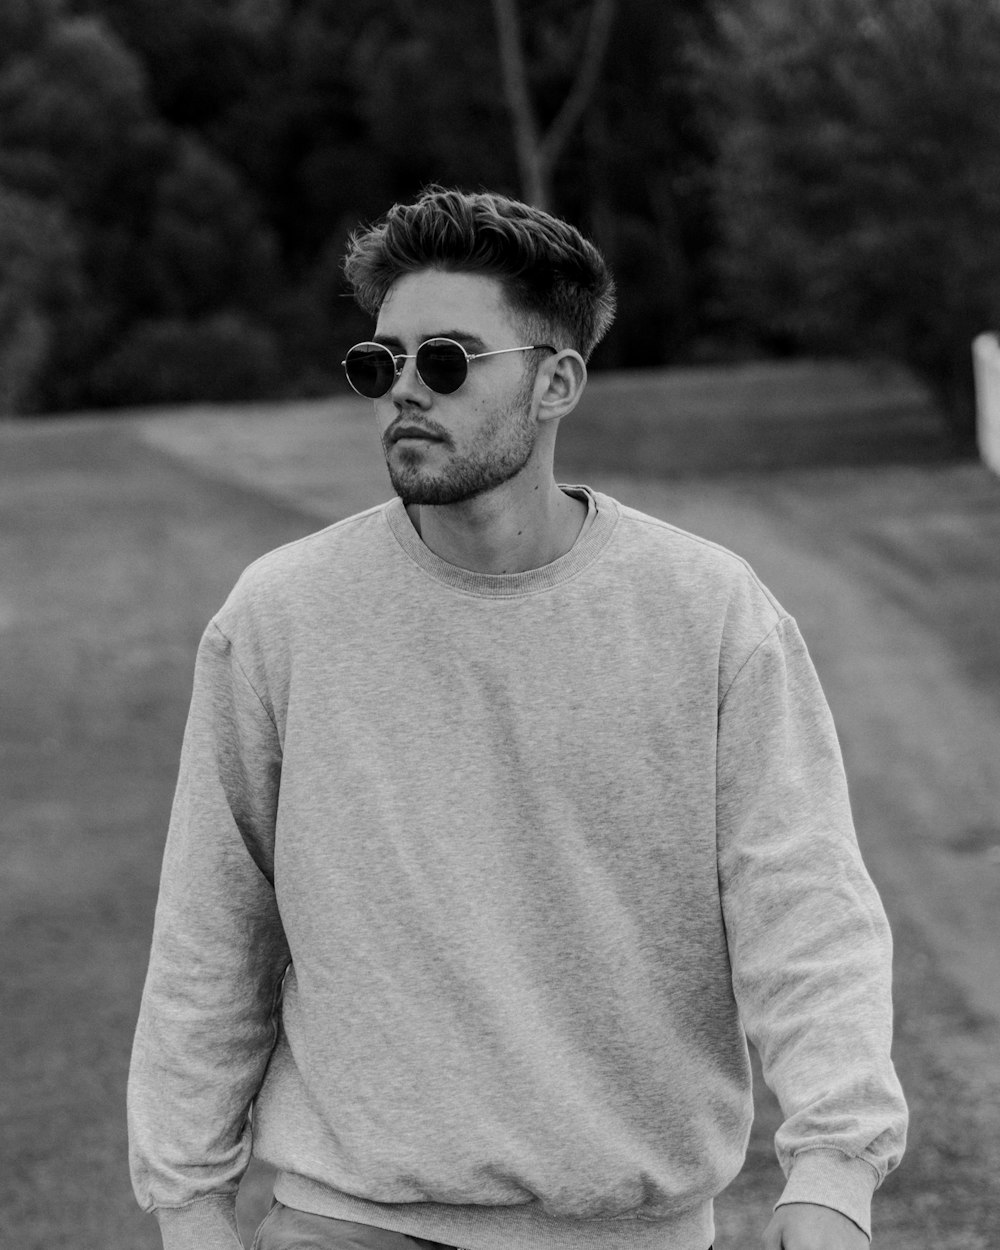 man in sweater wearing sunglasses in grayscale photography